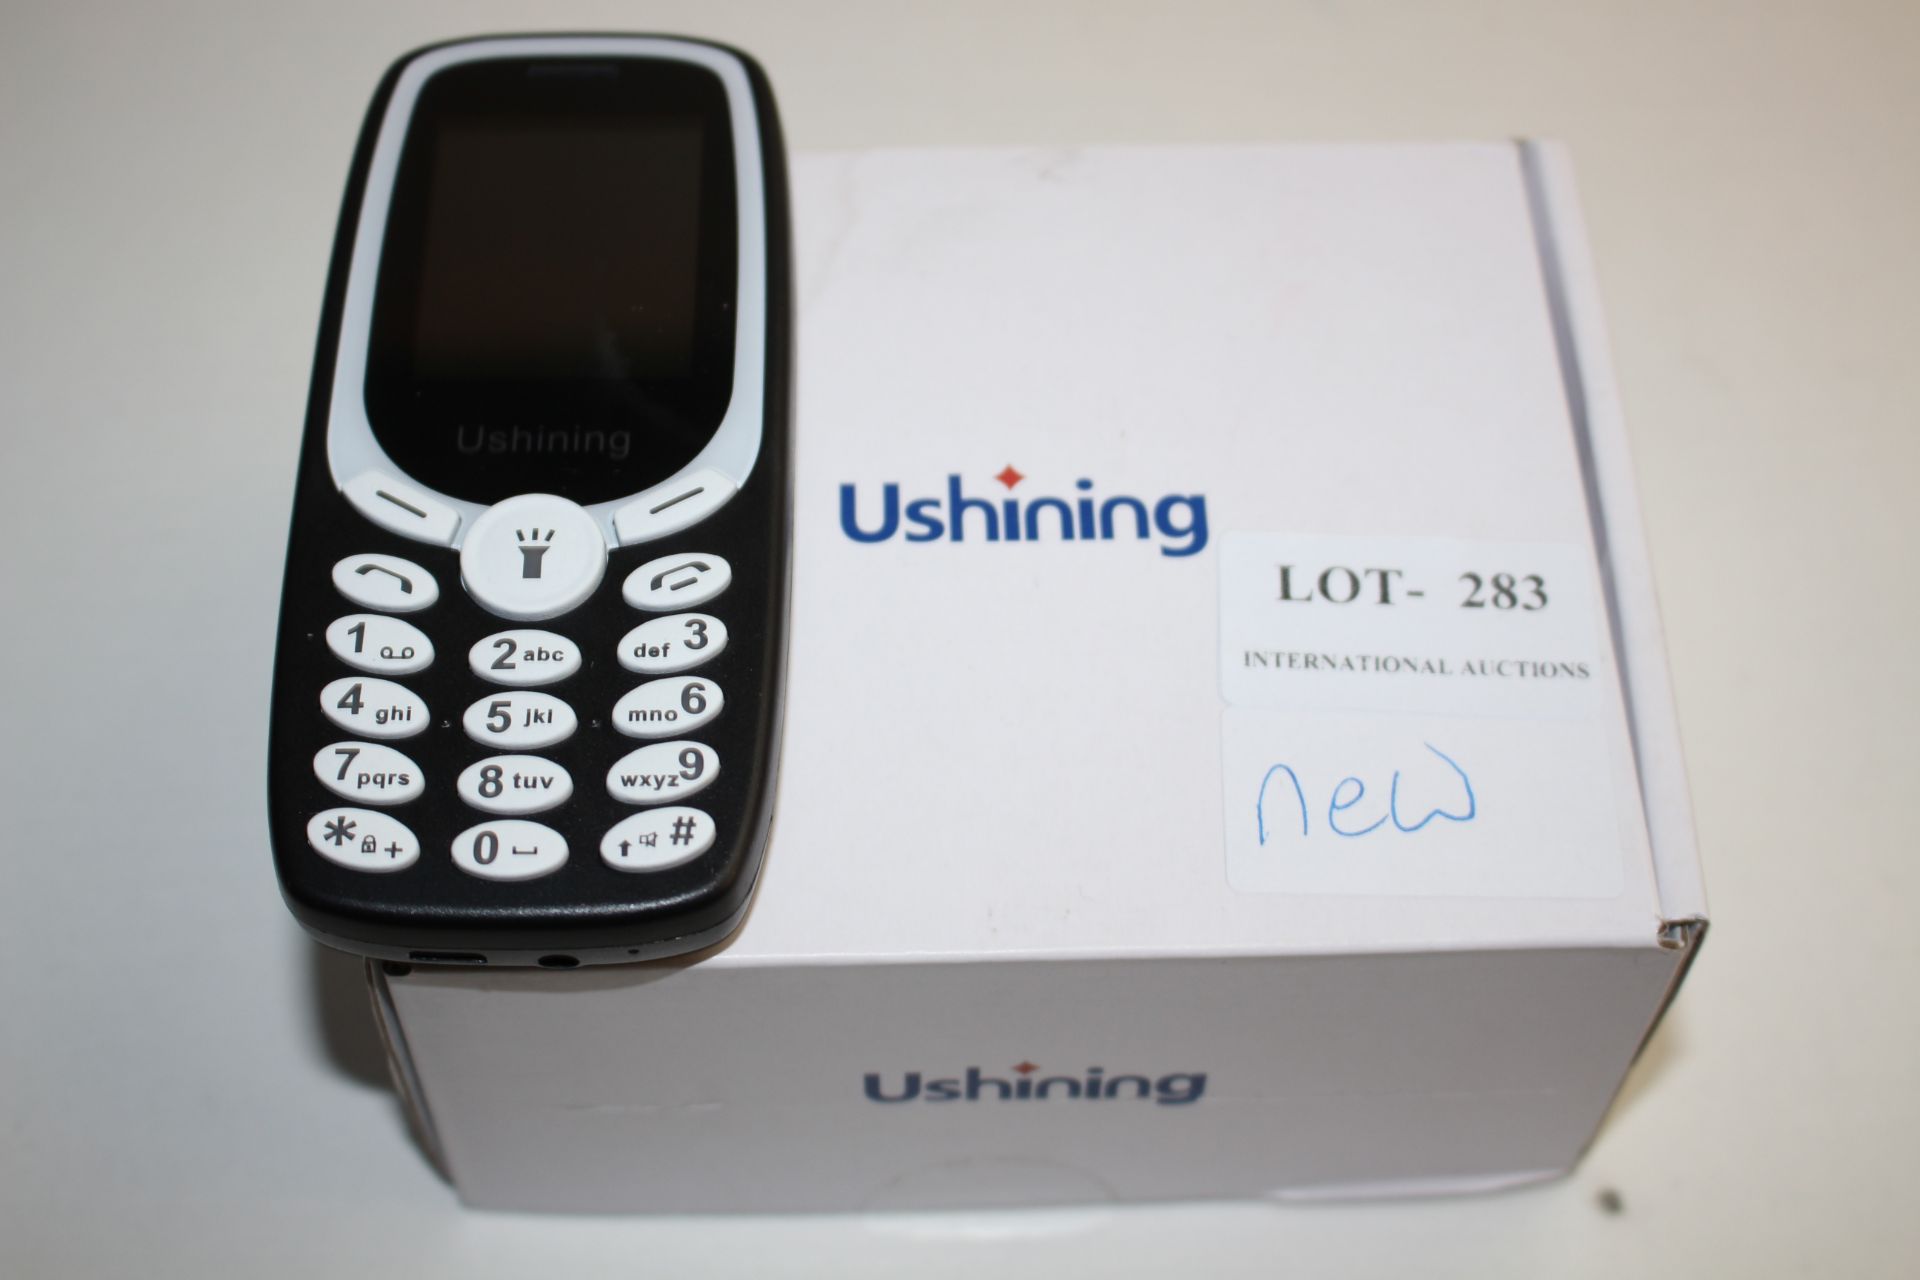 BOXED USHINING MOBILE PHONE (APPEARS NEW)Condition ReportAppraisal Available on Request- All Items